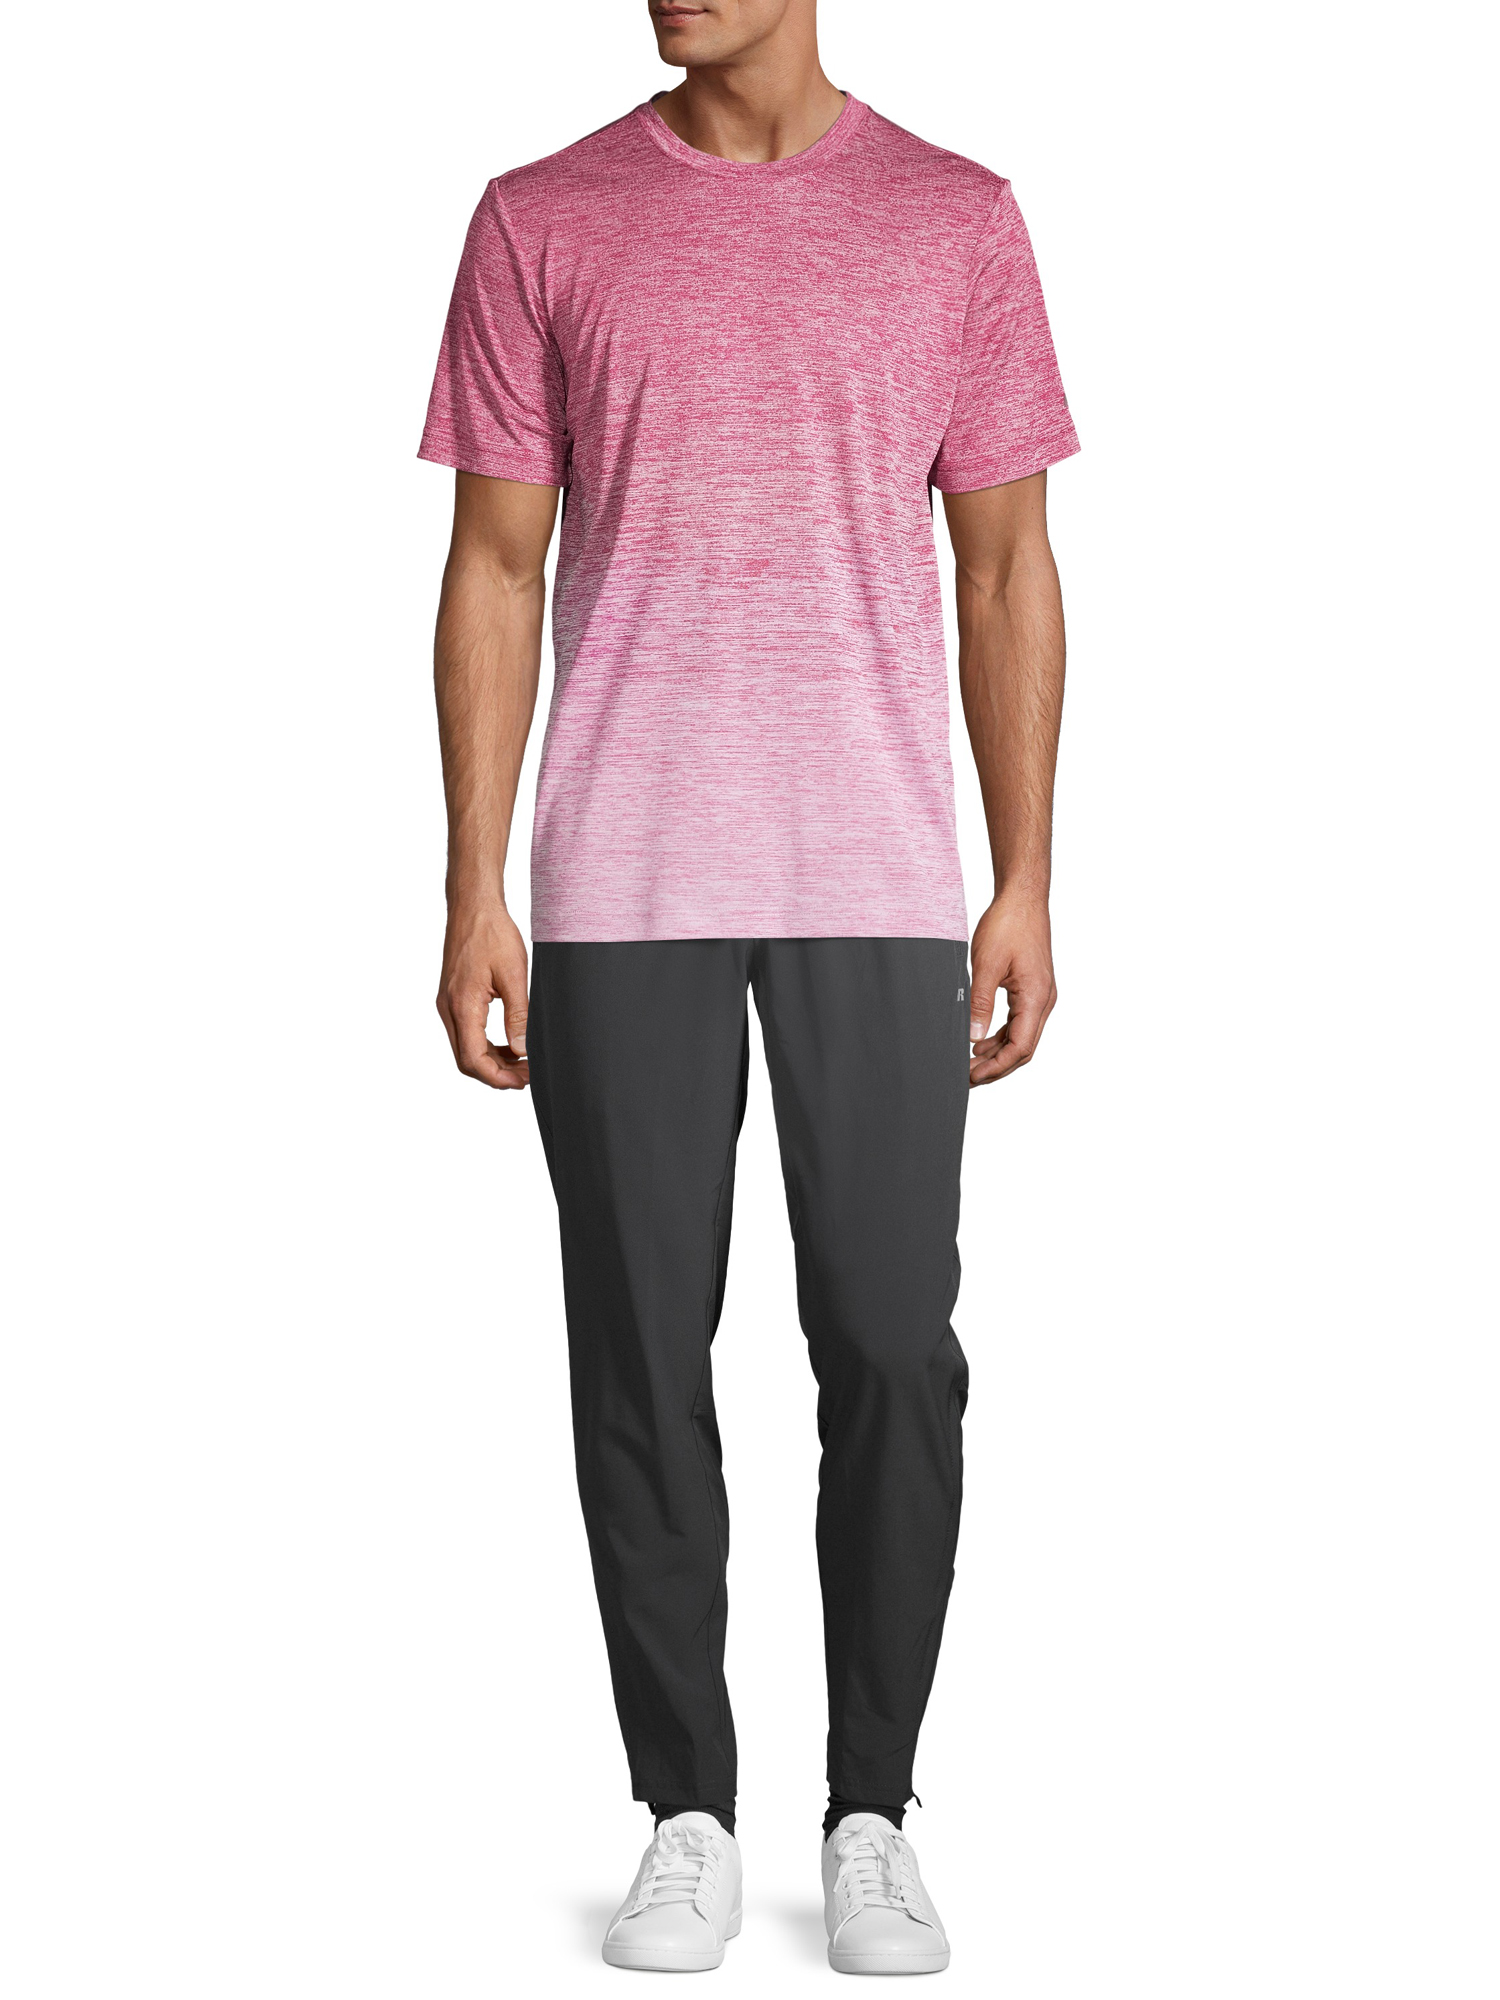 Russell Men's and Big Men's Ombre Performance Tee, up to Size 5XL - image 3 of 6